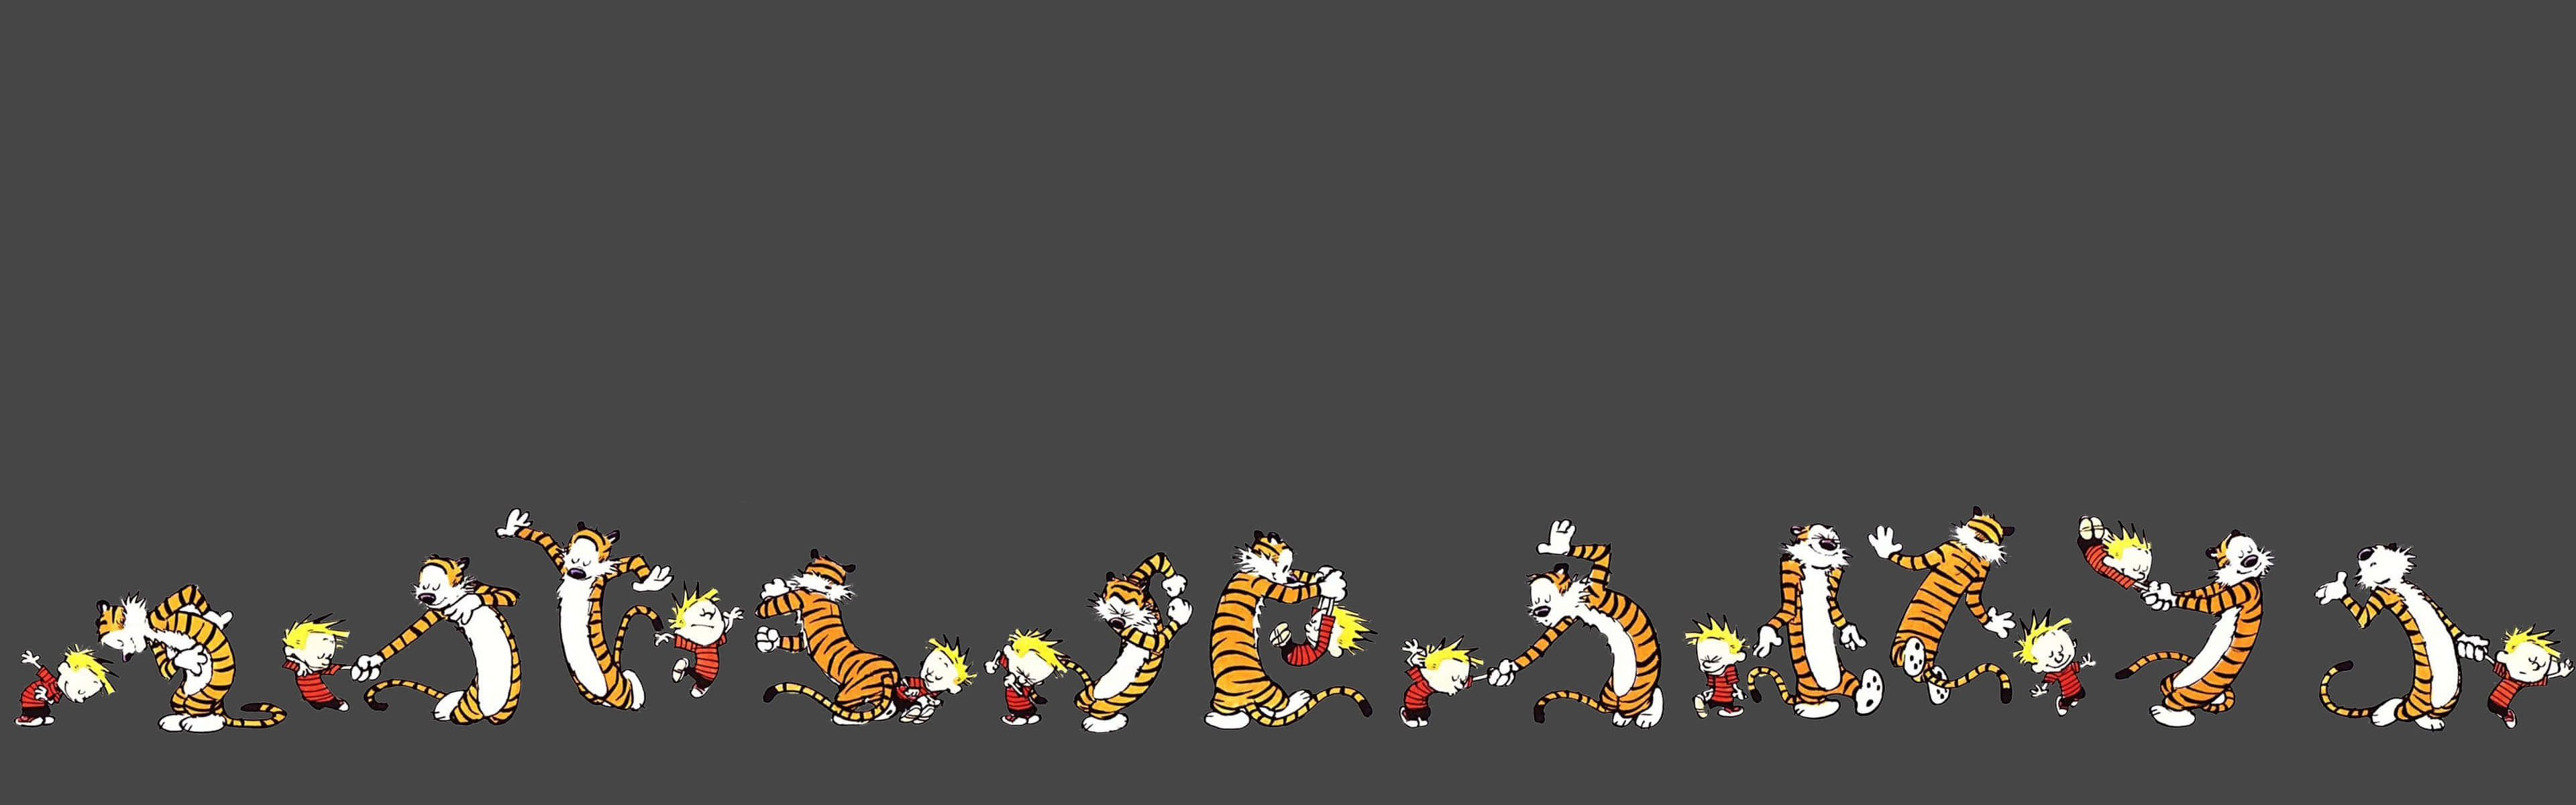 A Black Background With A Group Of Tigers Wallpaper